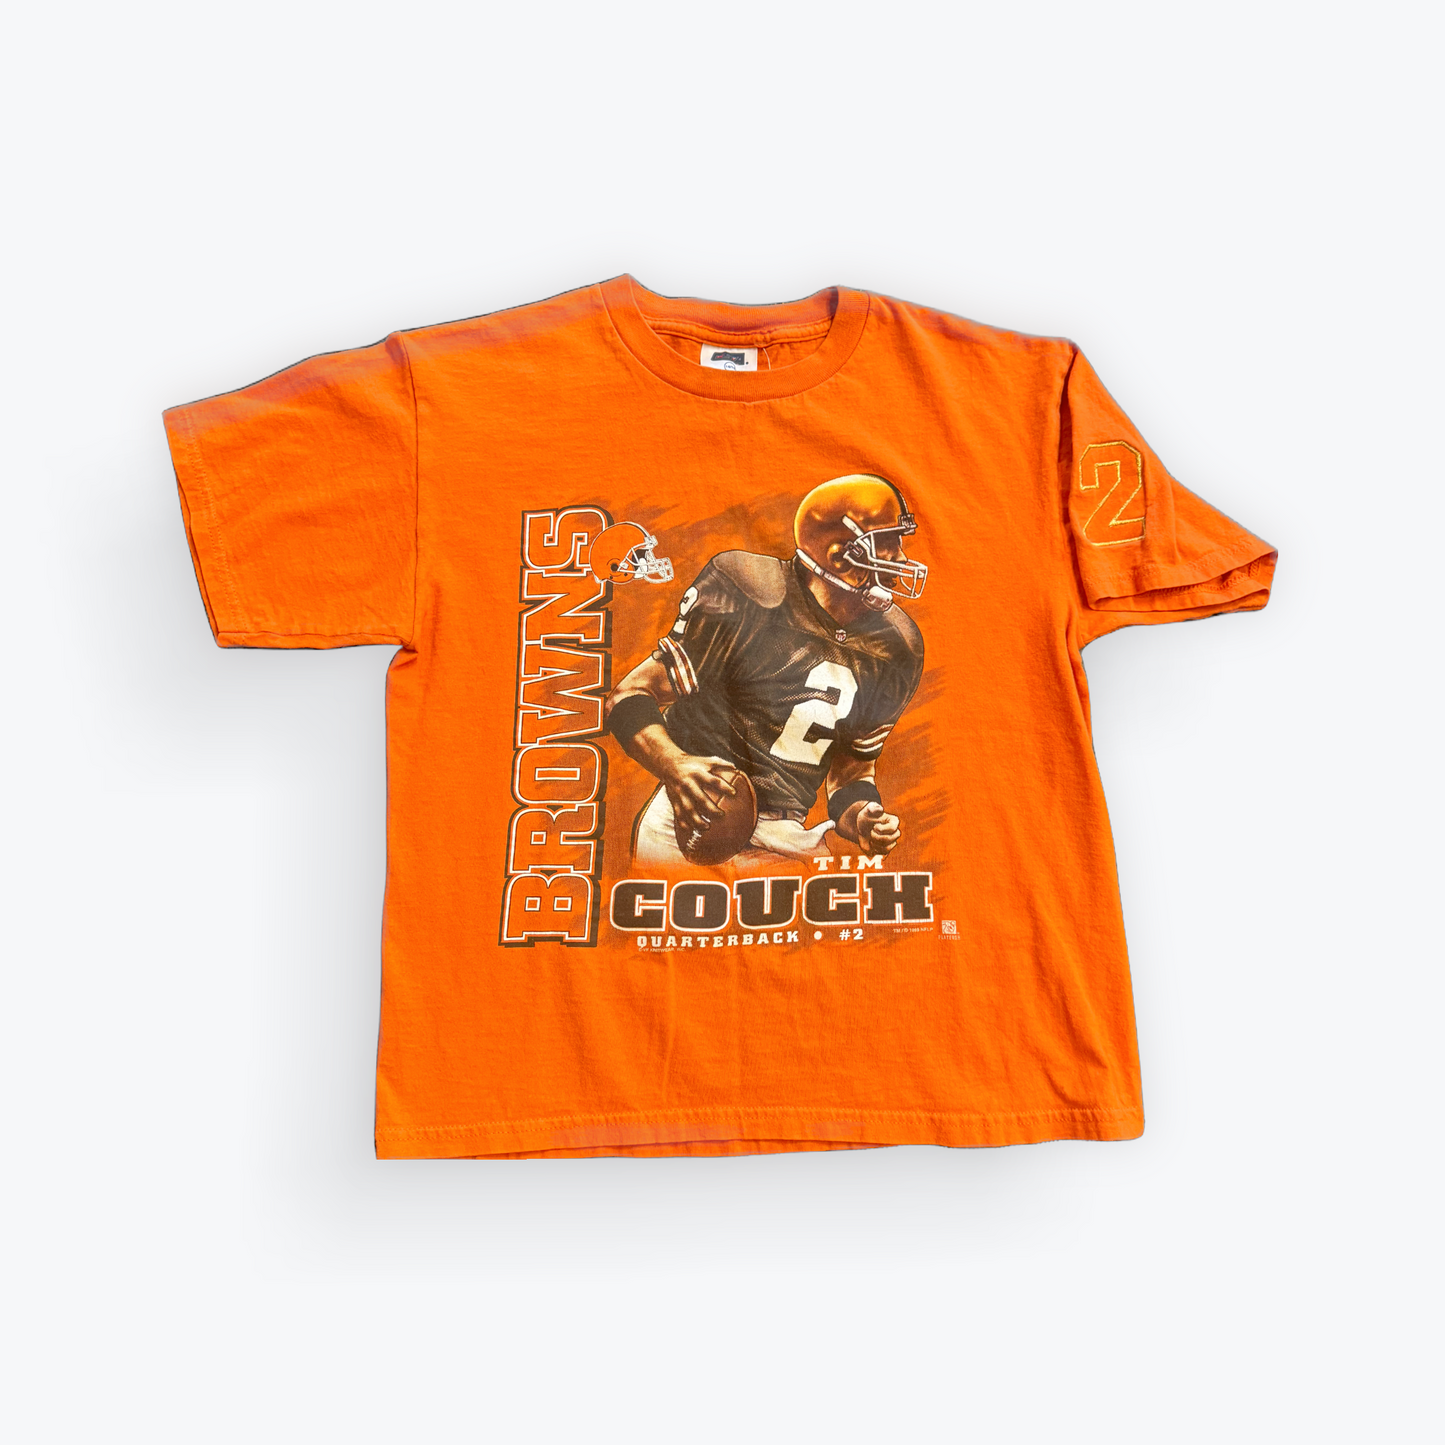 Vintage 1999 Cleveland Browns Tim Couch Tee